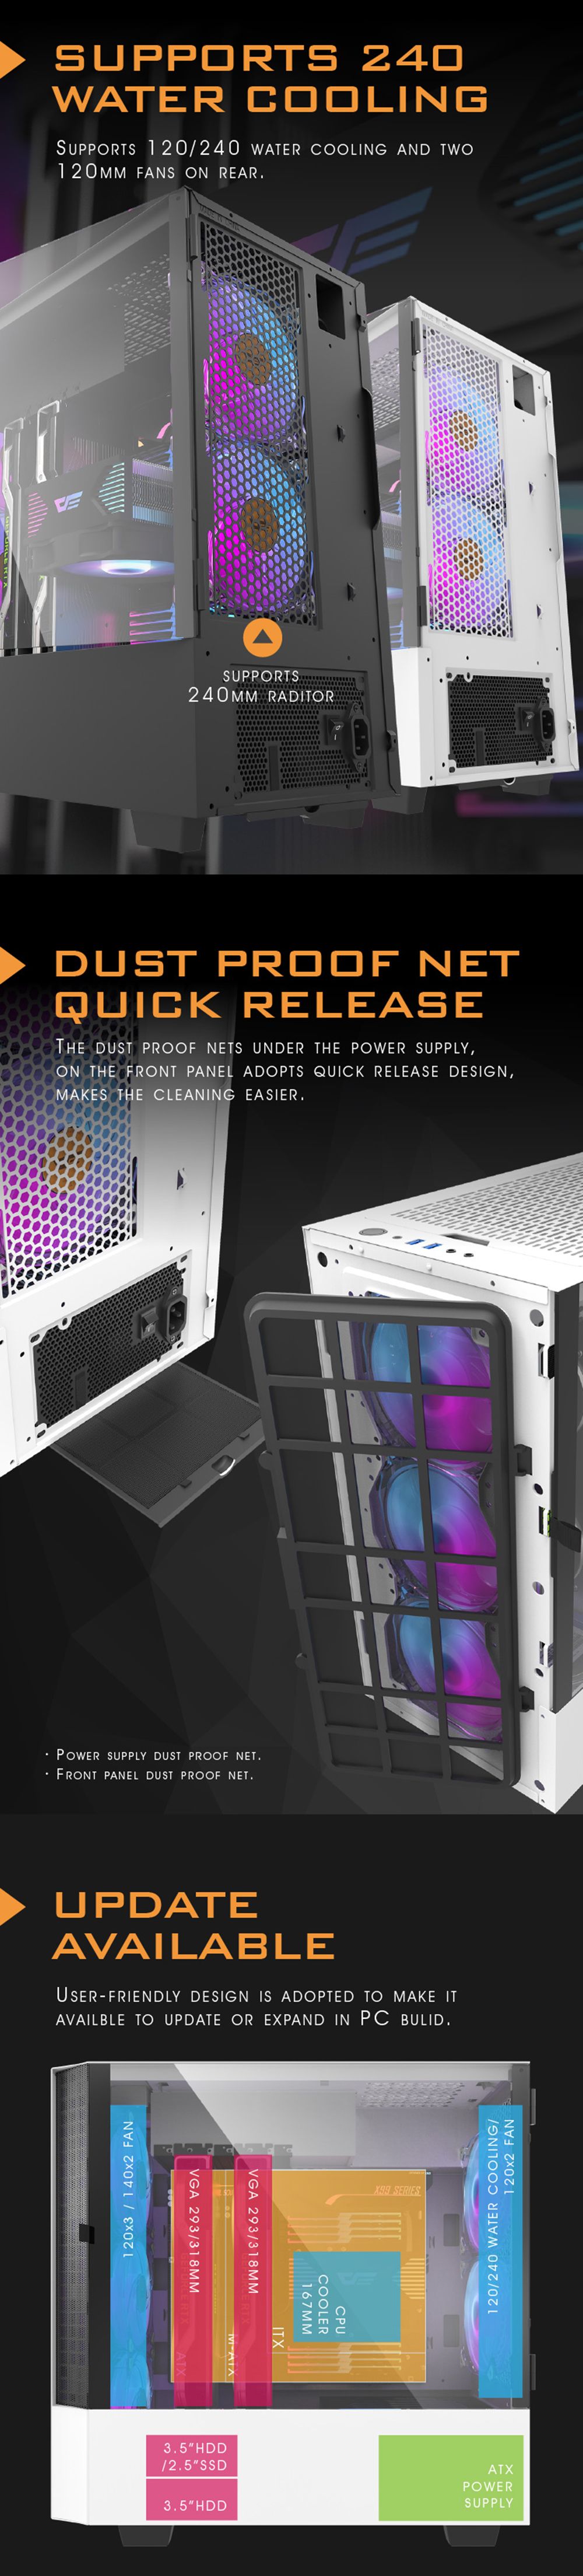 DarkFlash-DLV22-Gaming-Computer-Case-ATXM-ATXITX-Supported-Rightside-Door-Opening-Dust-Proof-Net-Whi-1679402